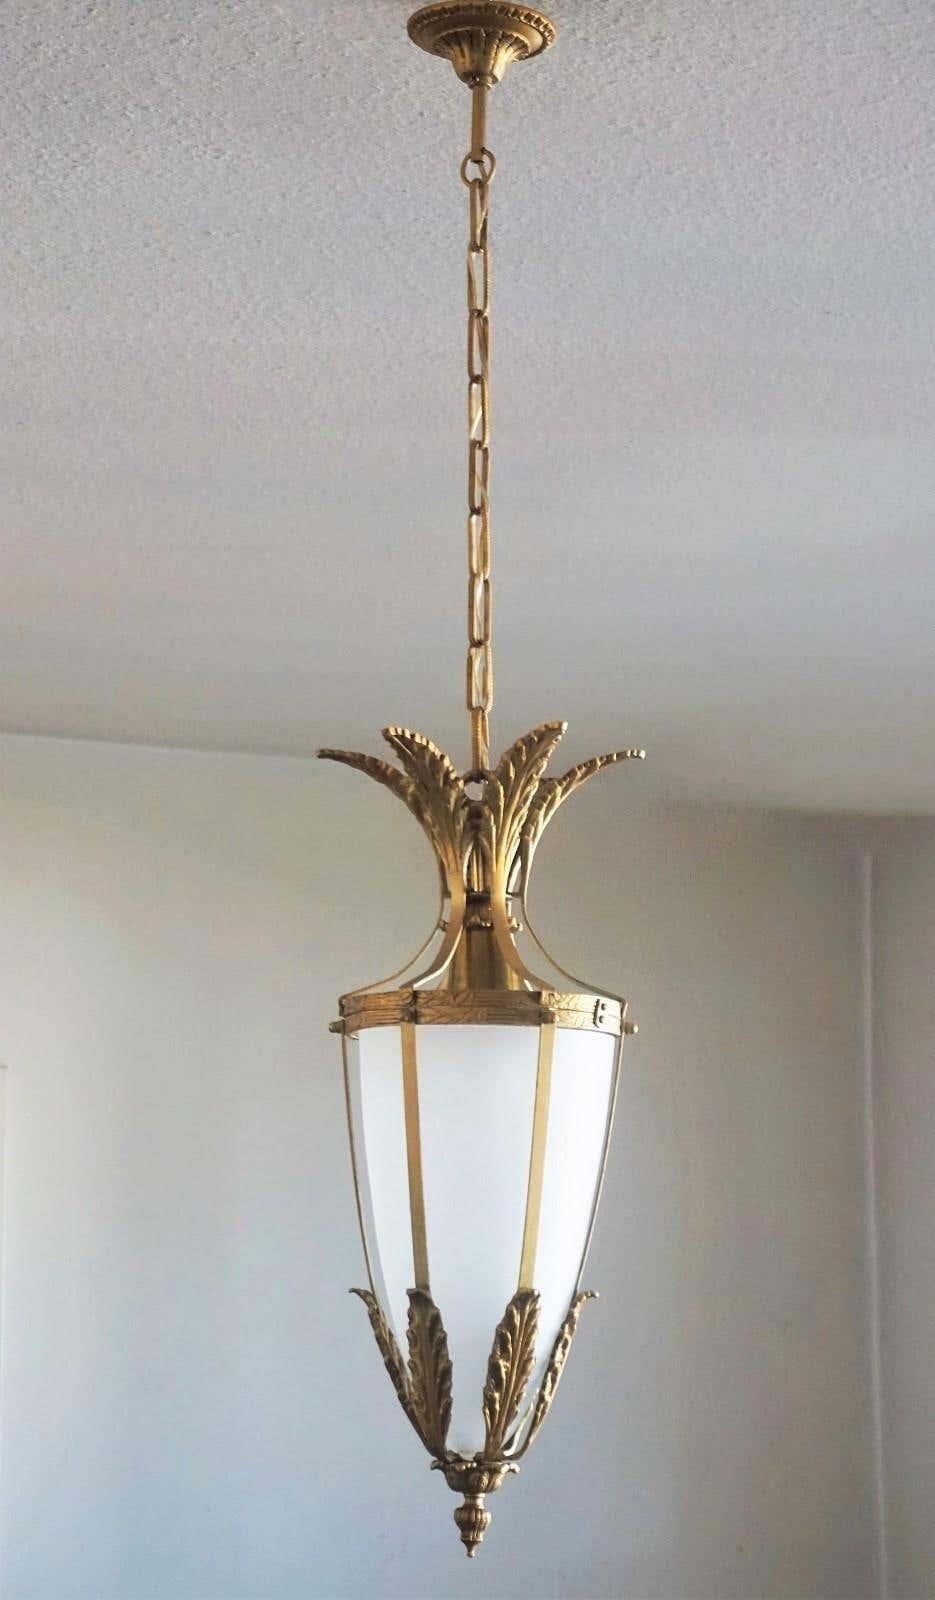 Pair of elegant, beautiful Art Deco lanterns, Italy, 1930-1939. Solid bronze parcel brass with cone shaped satin glass shade.
Each lantern takes one E27 large sized bulb up to 100watt.
Dimensions:
Total height with chain 39